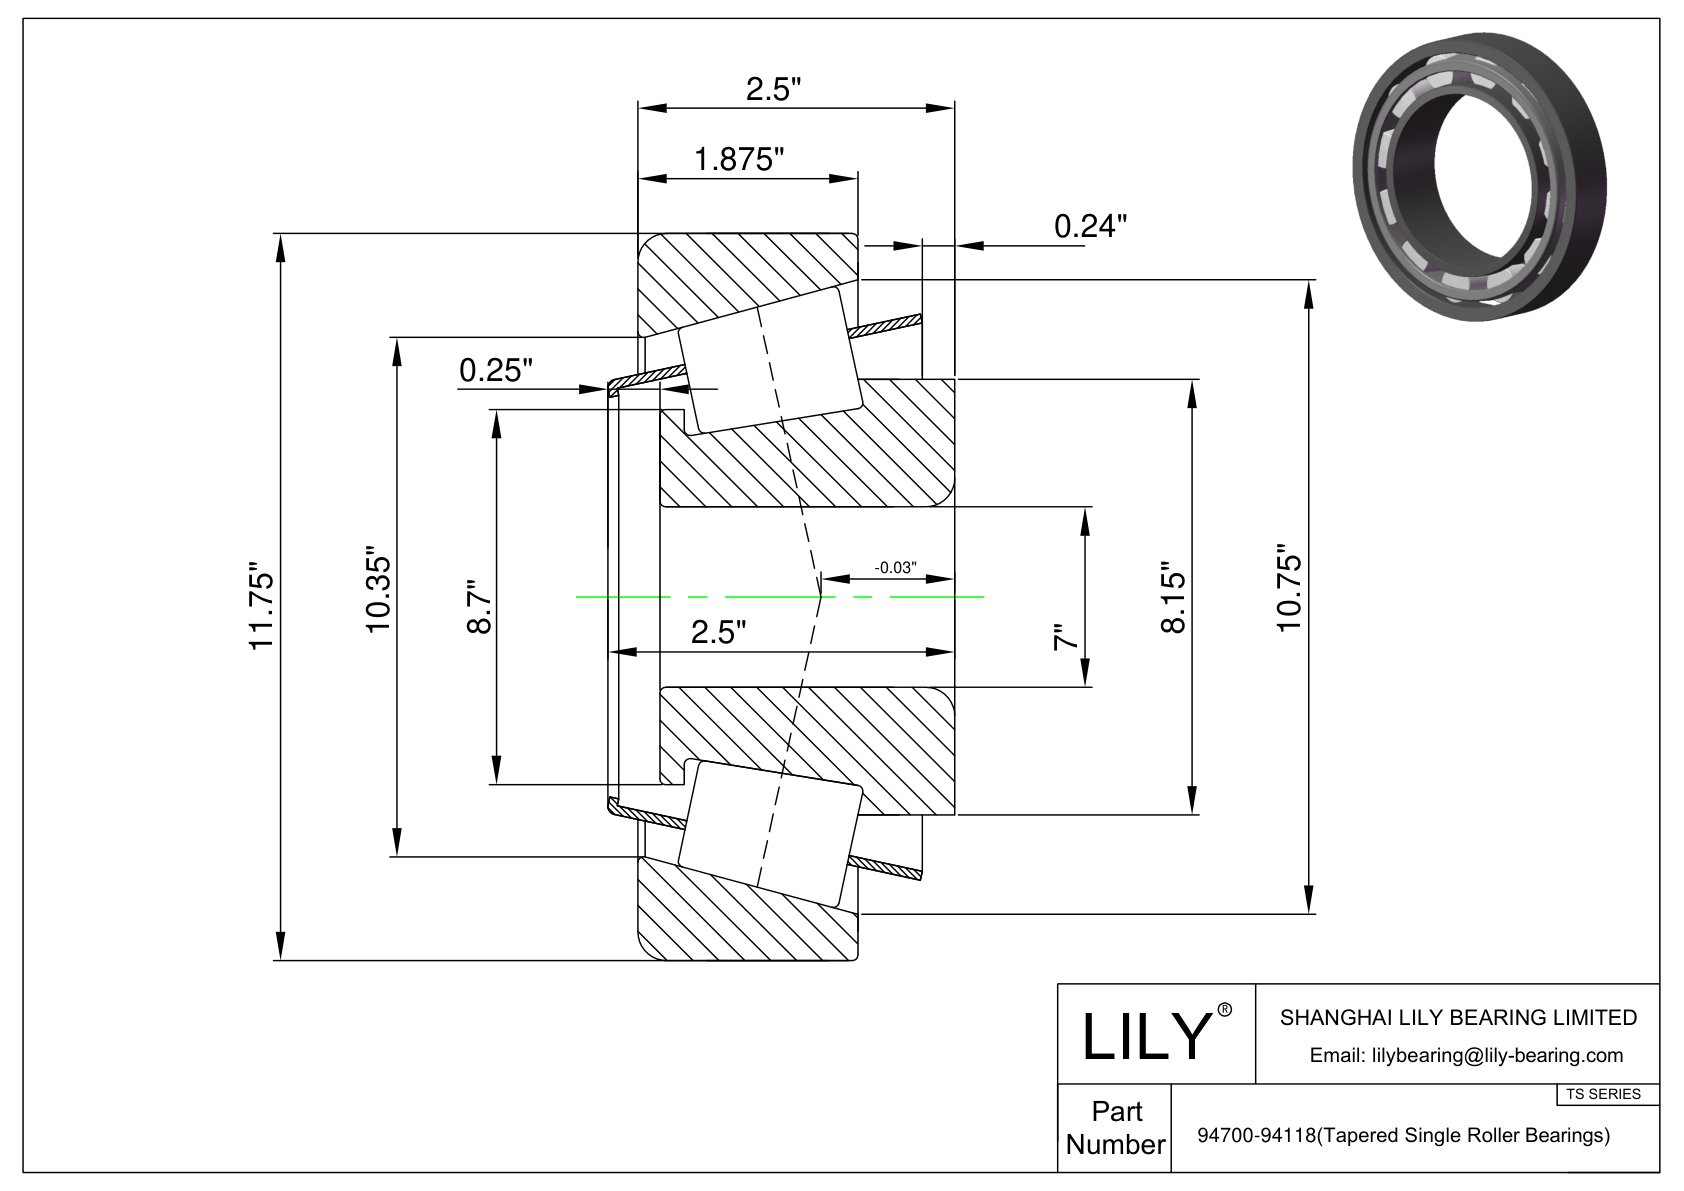 94700-94118 TS (Tapered Single Roller Bearings) (Imperial) cad drawing